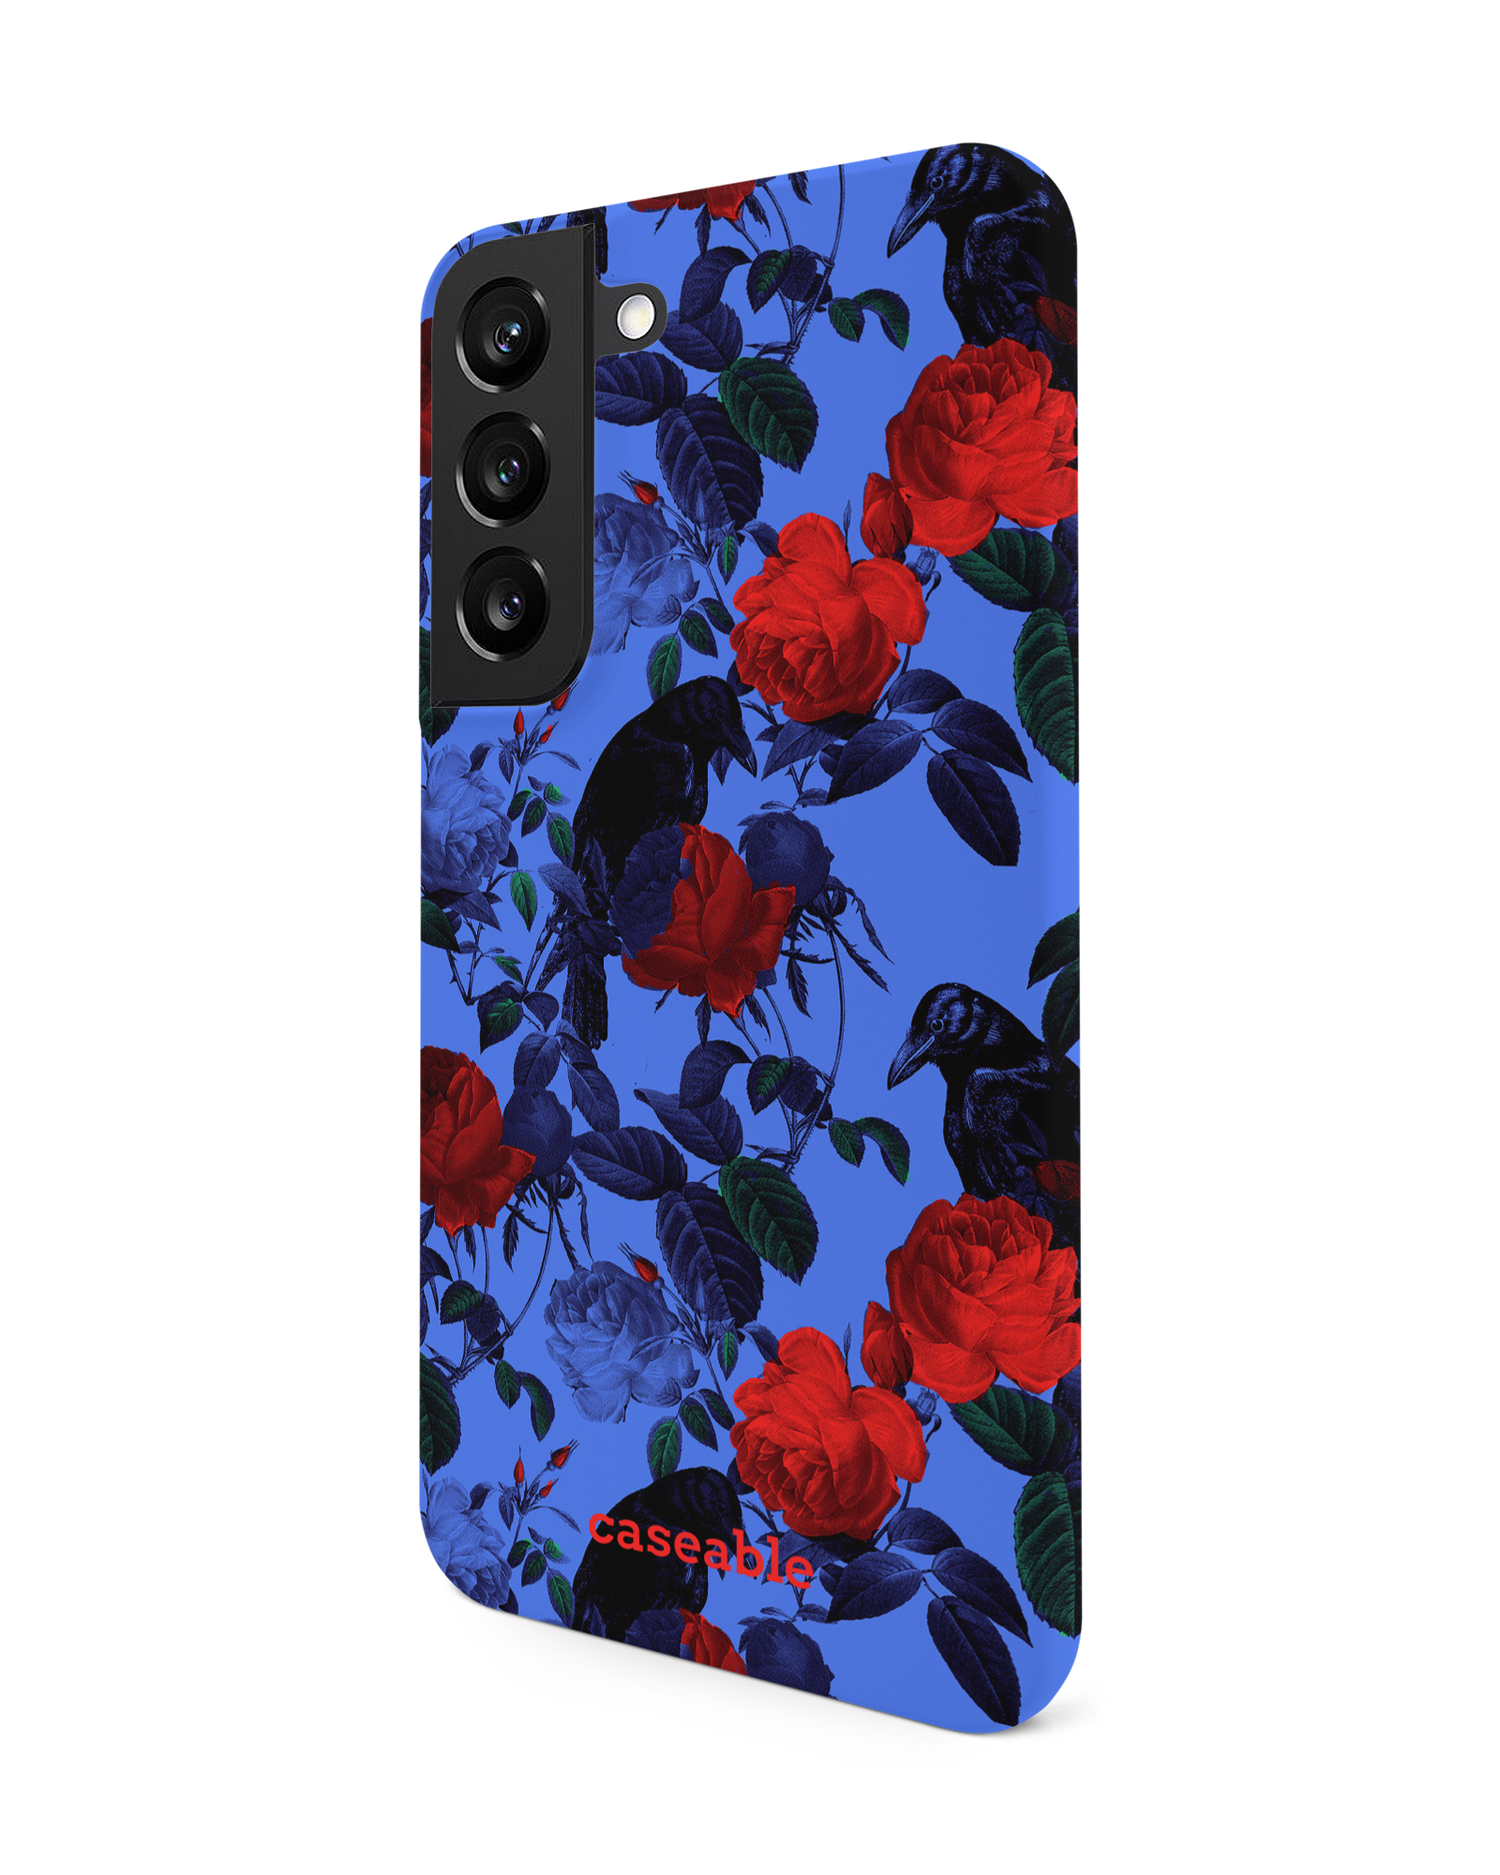 Roses And Ravens Hard Shell Phone Case Samsung Galaxy S22 5G: View from the right side